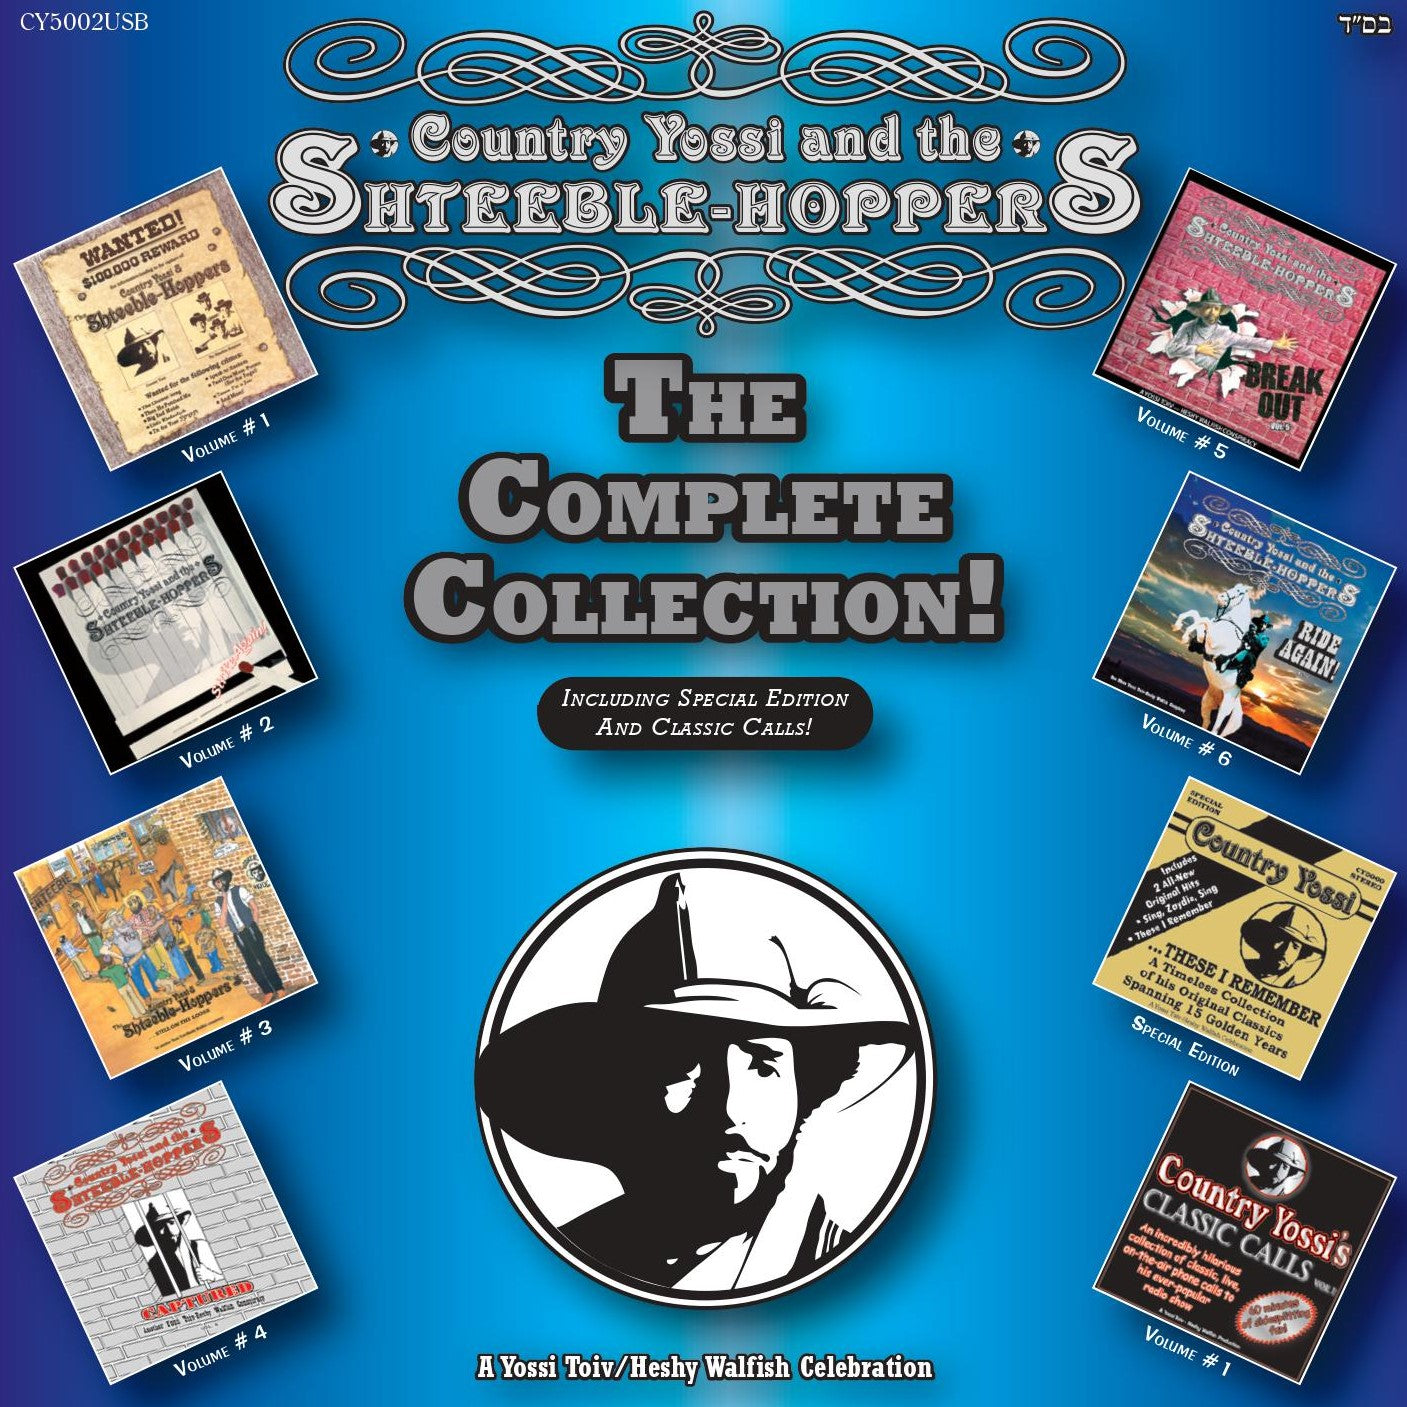 Country Yossi & The Shteeble Hoppers - The Complete Collection (USB)